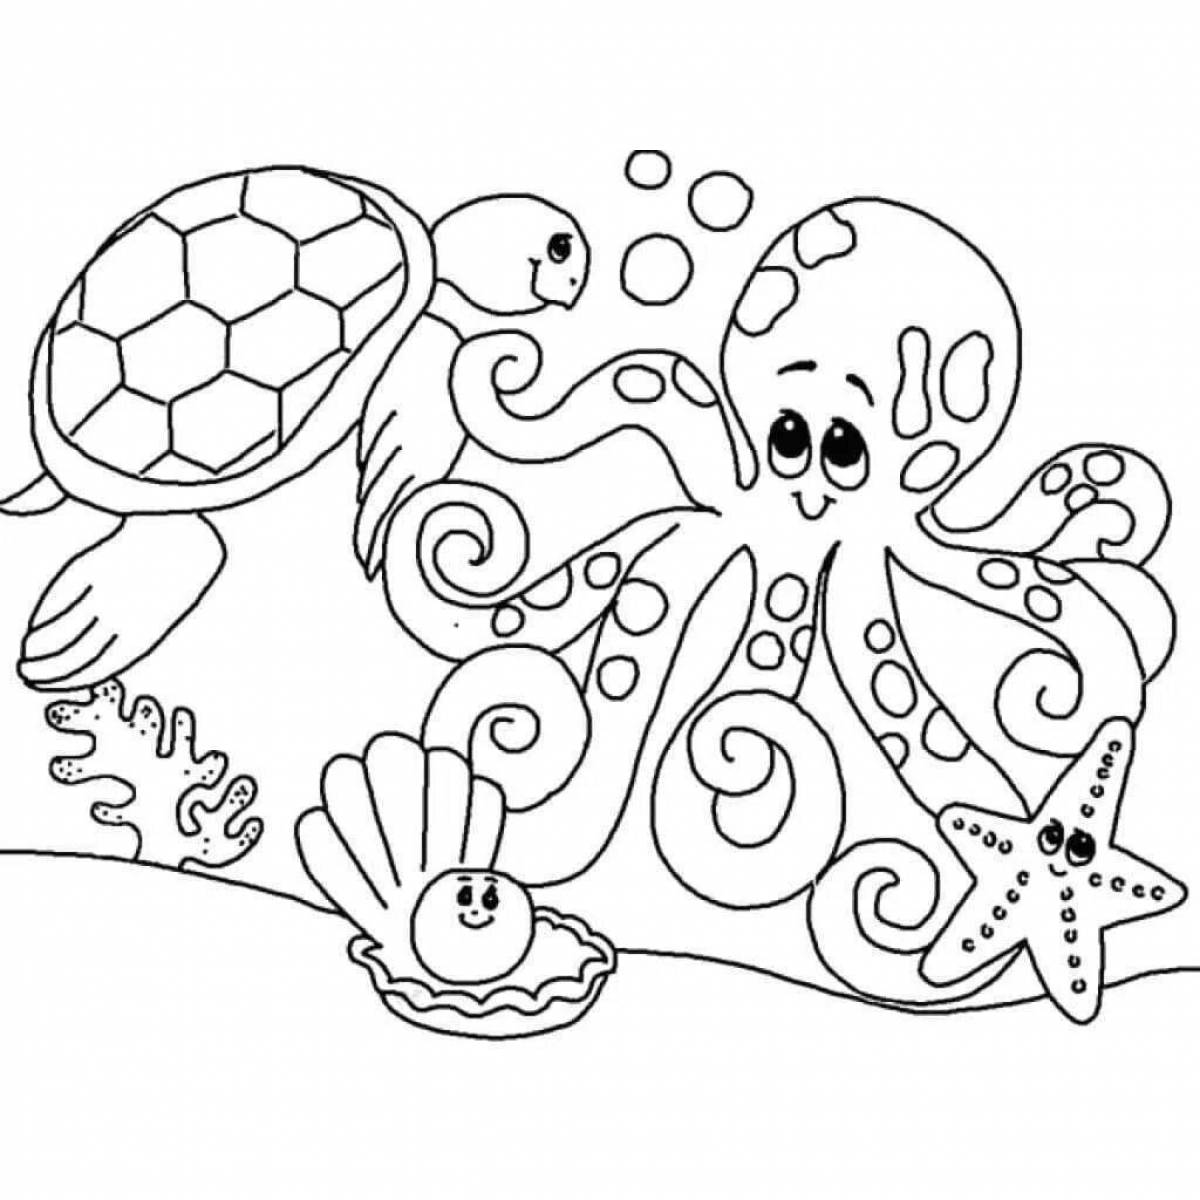 Exciting coloring of the seabed for children